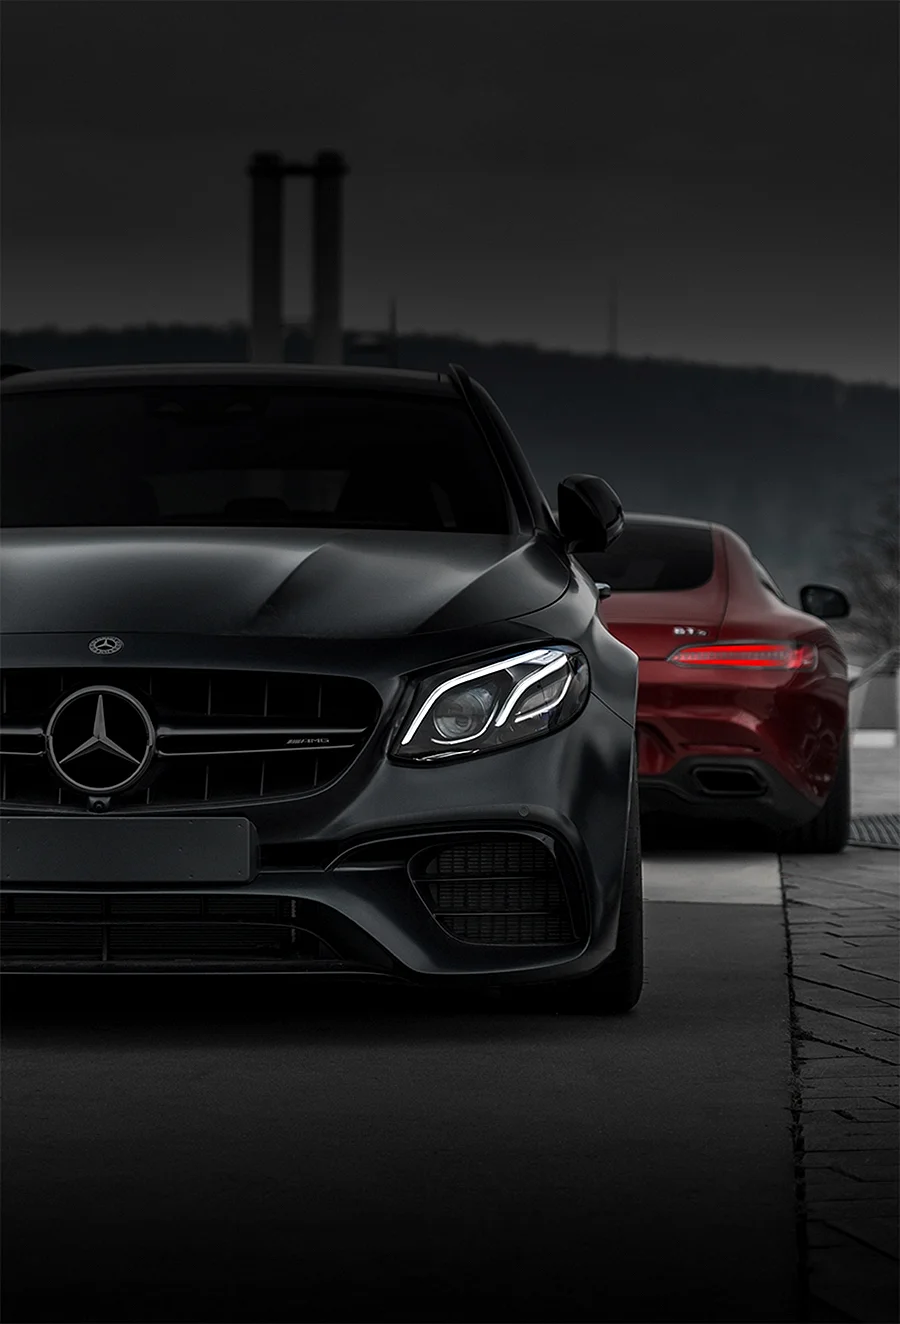 Mercedes Benz E63s Amg Wallpaper For iPhone